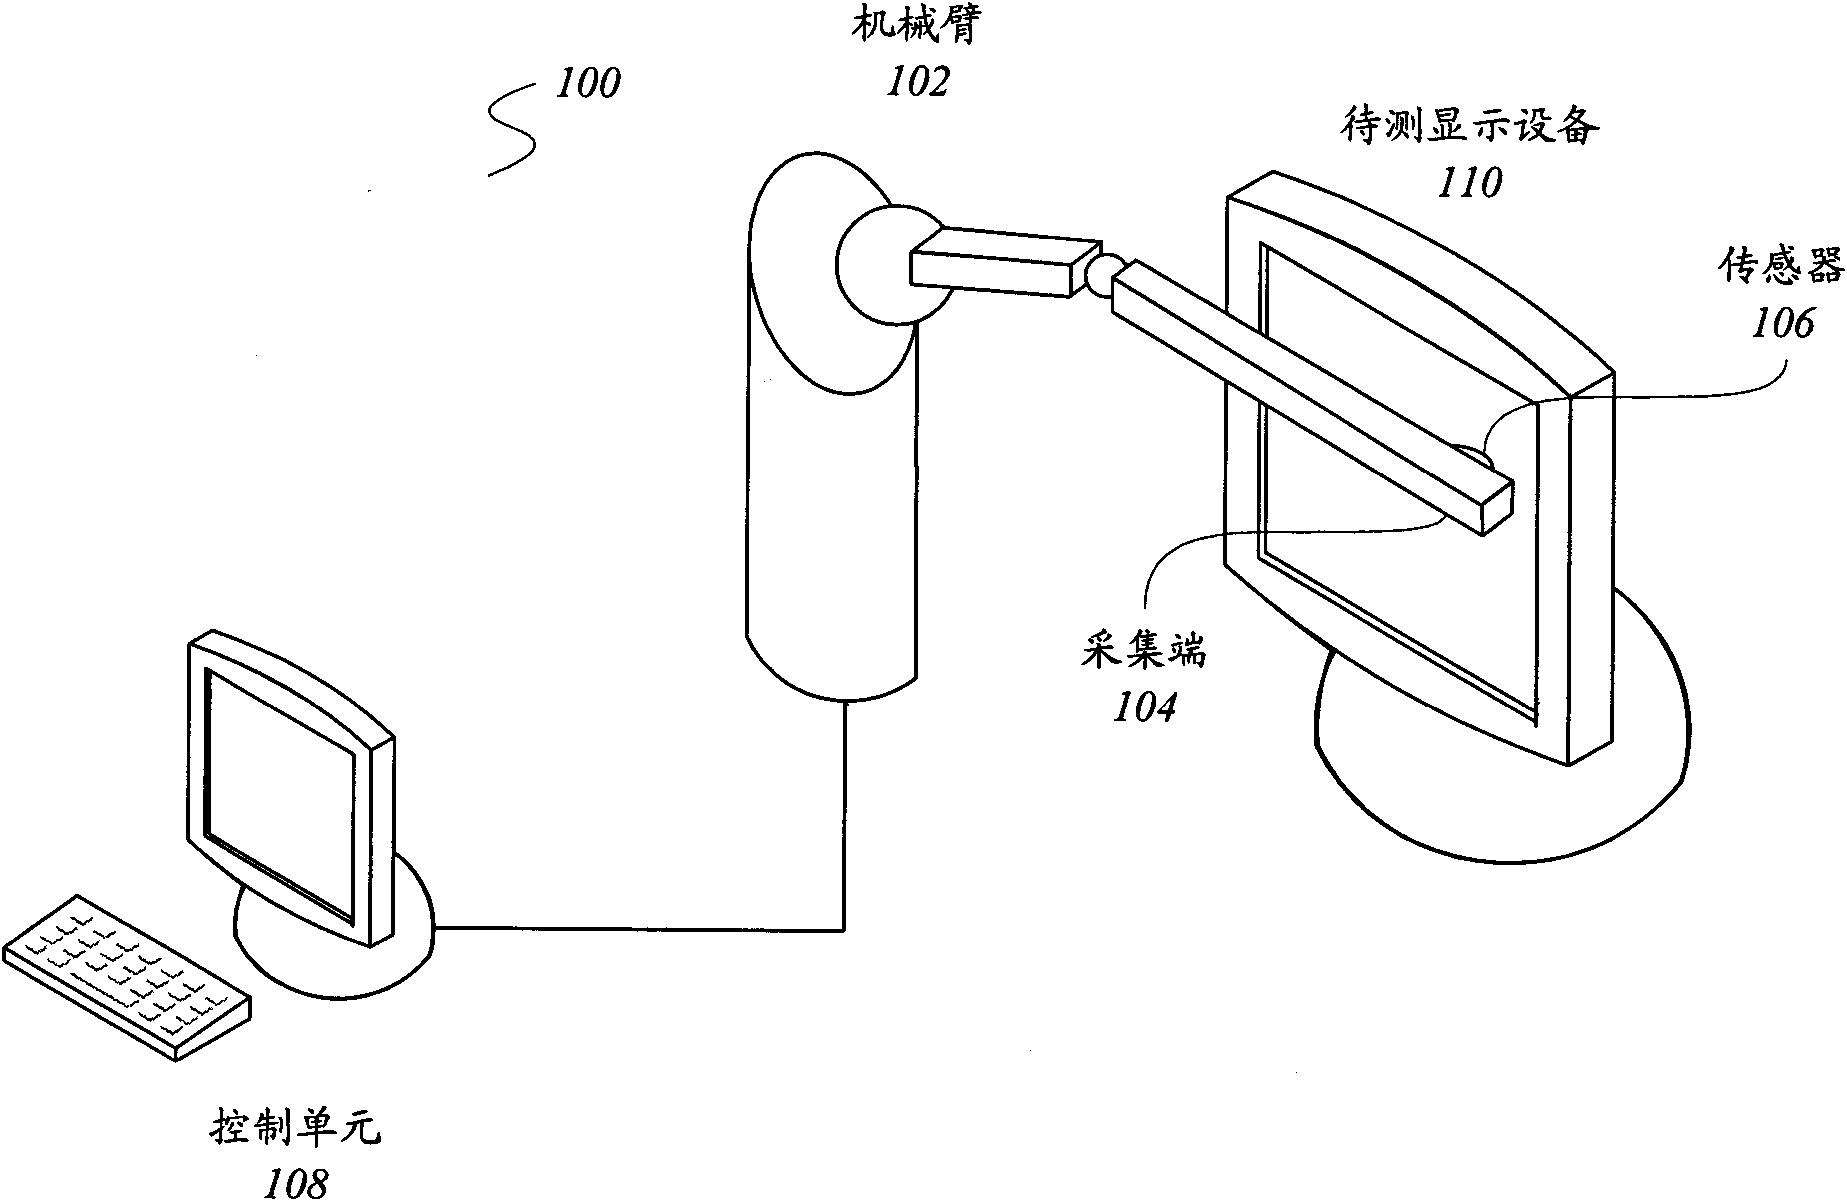 Display equipment evaluation system and display equipment evaluation method